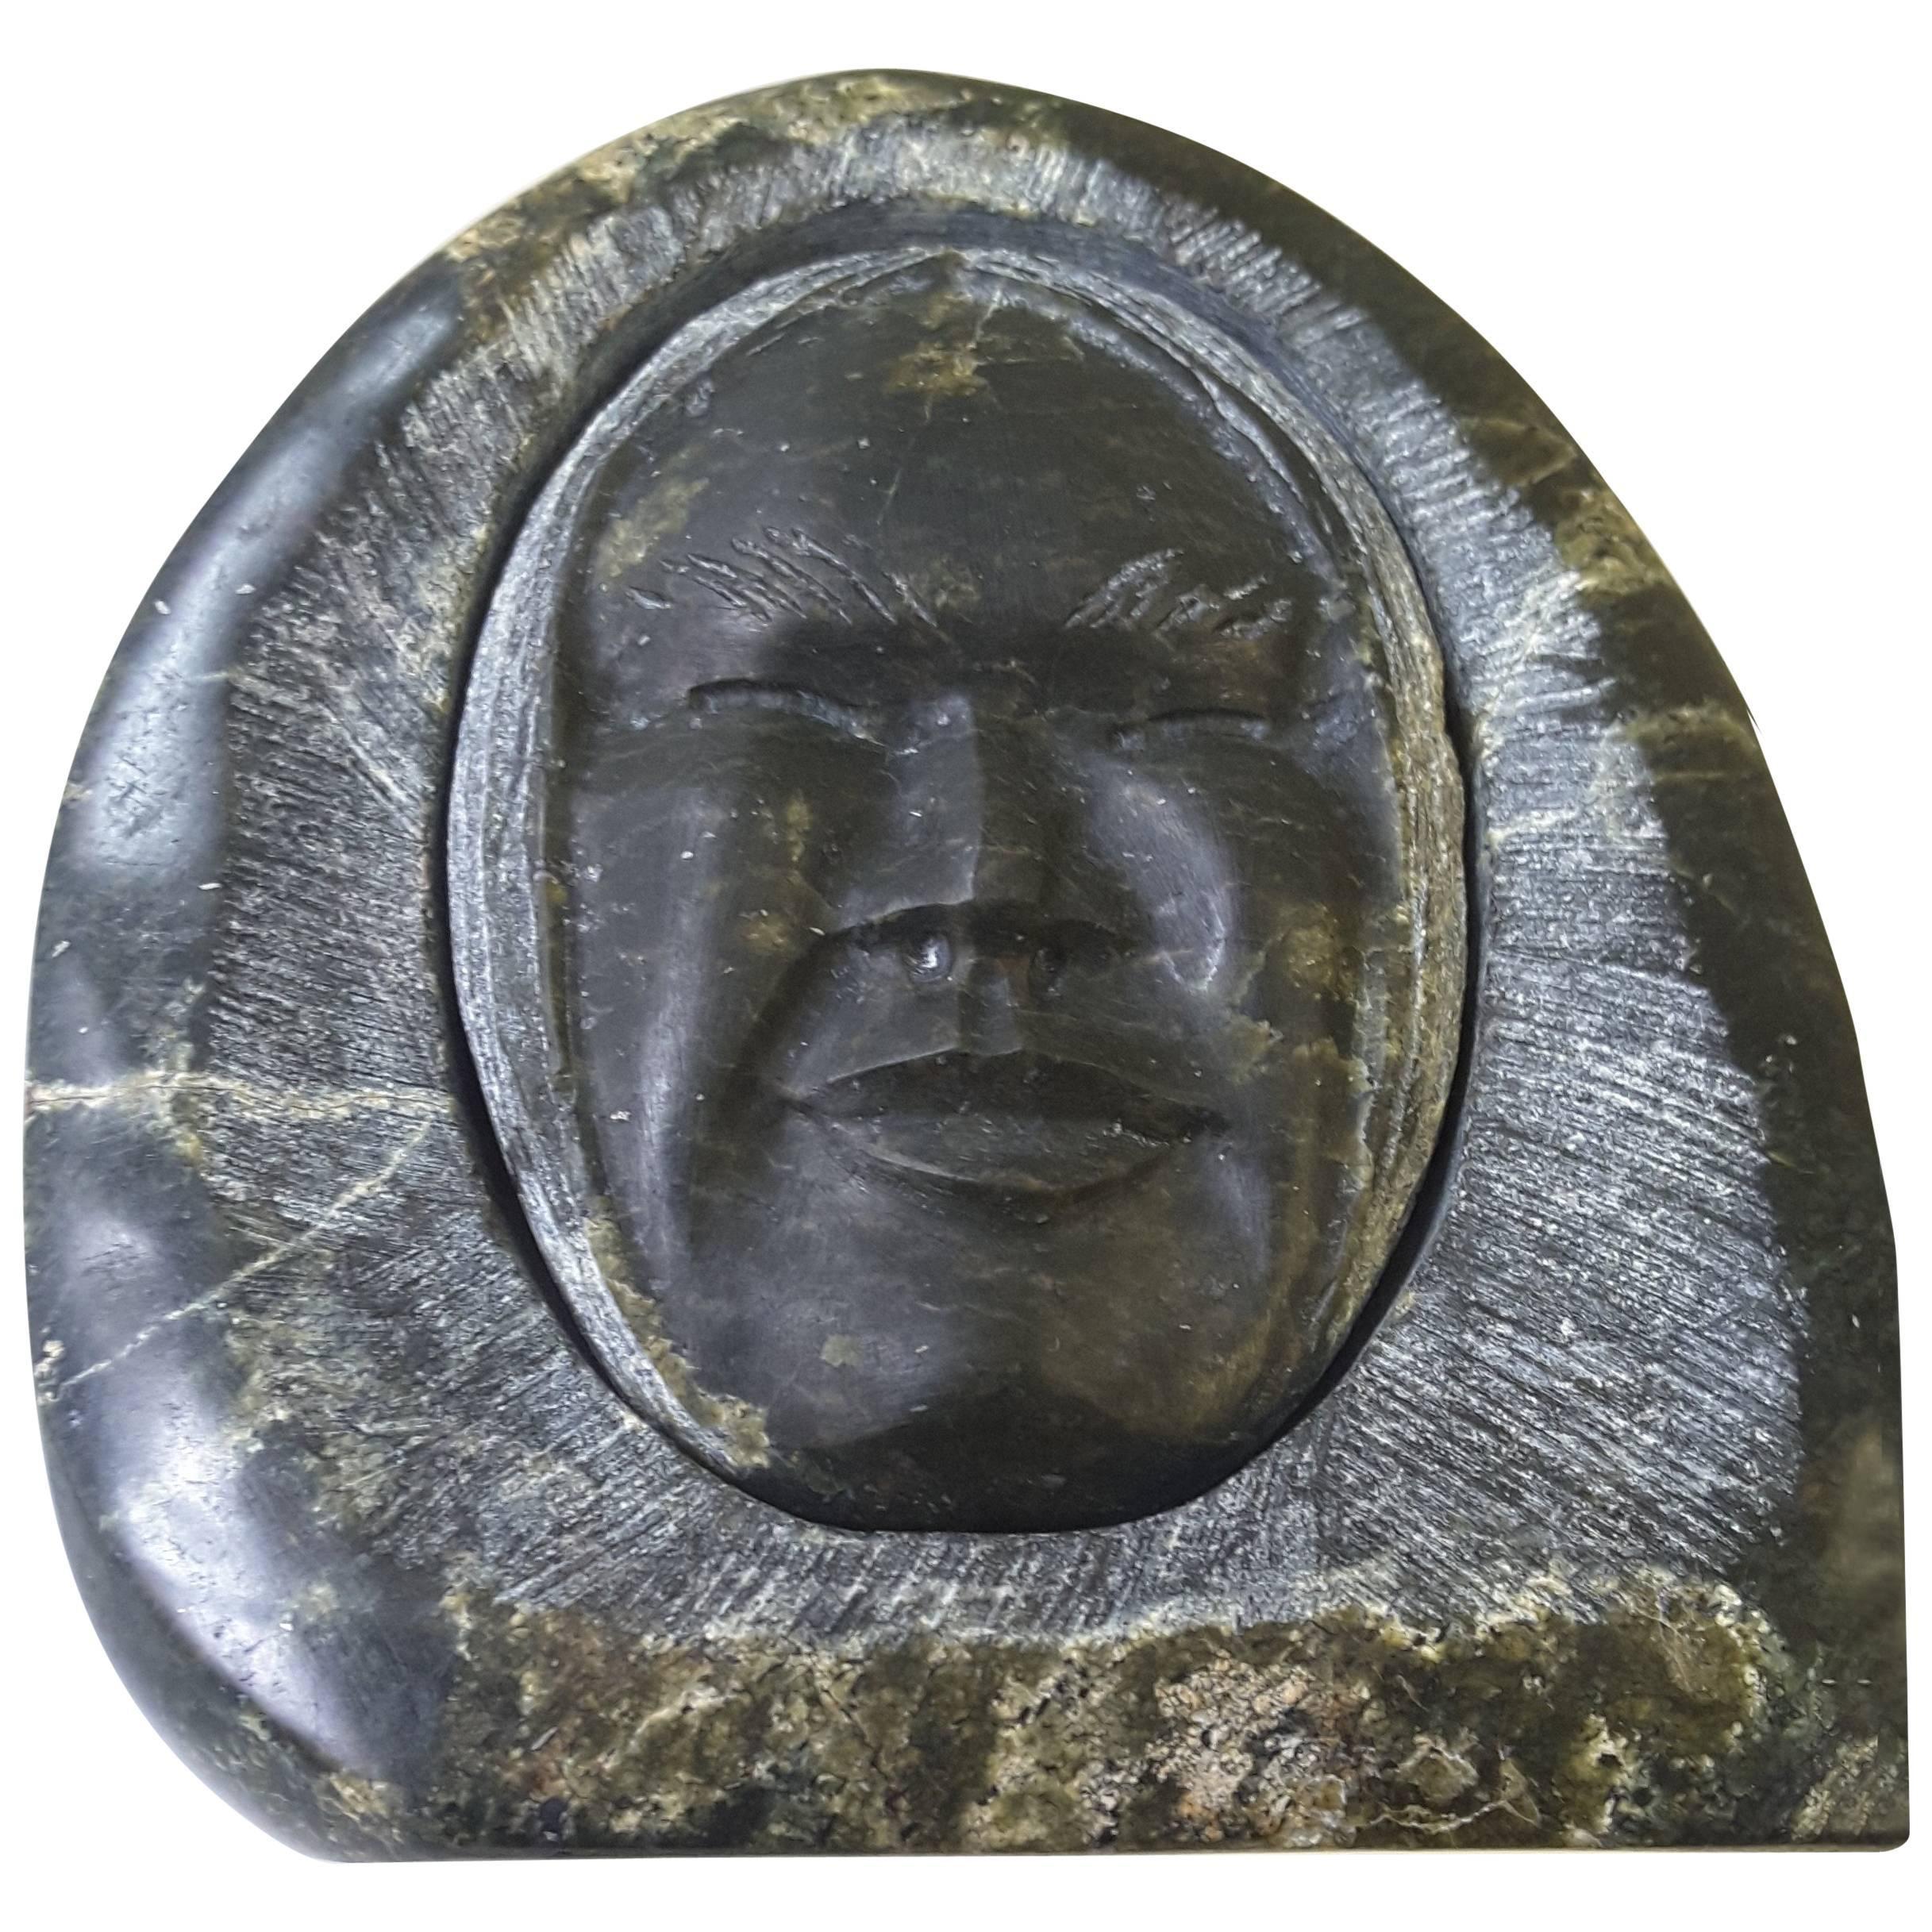 Inuit Soapstone Sculpture of a Face Wrapped in a Parka Hood